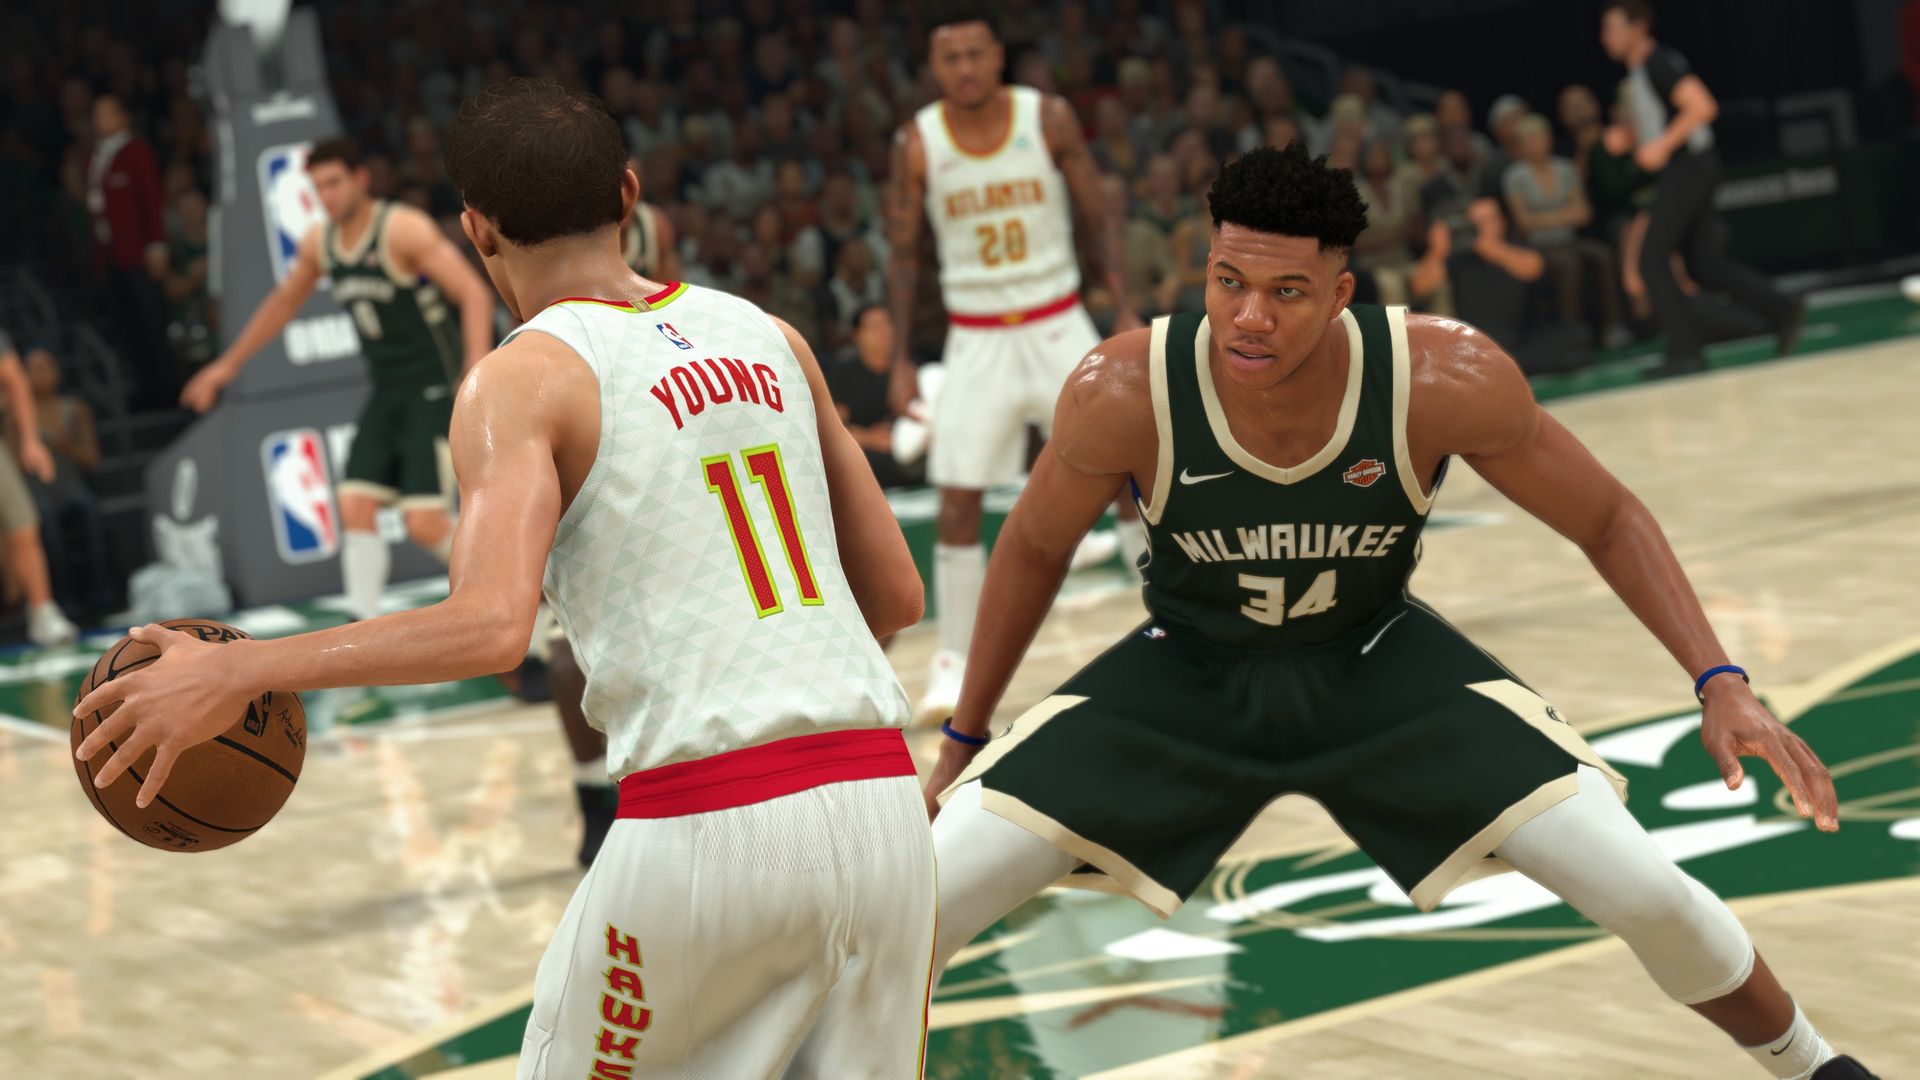 Video game screenshot of basketball players competing